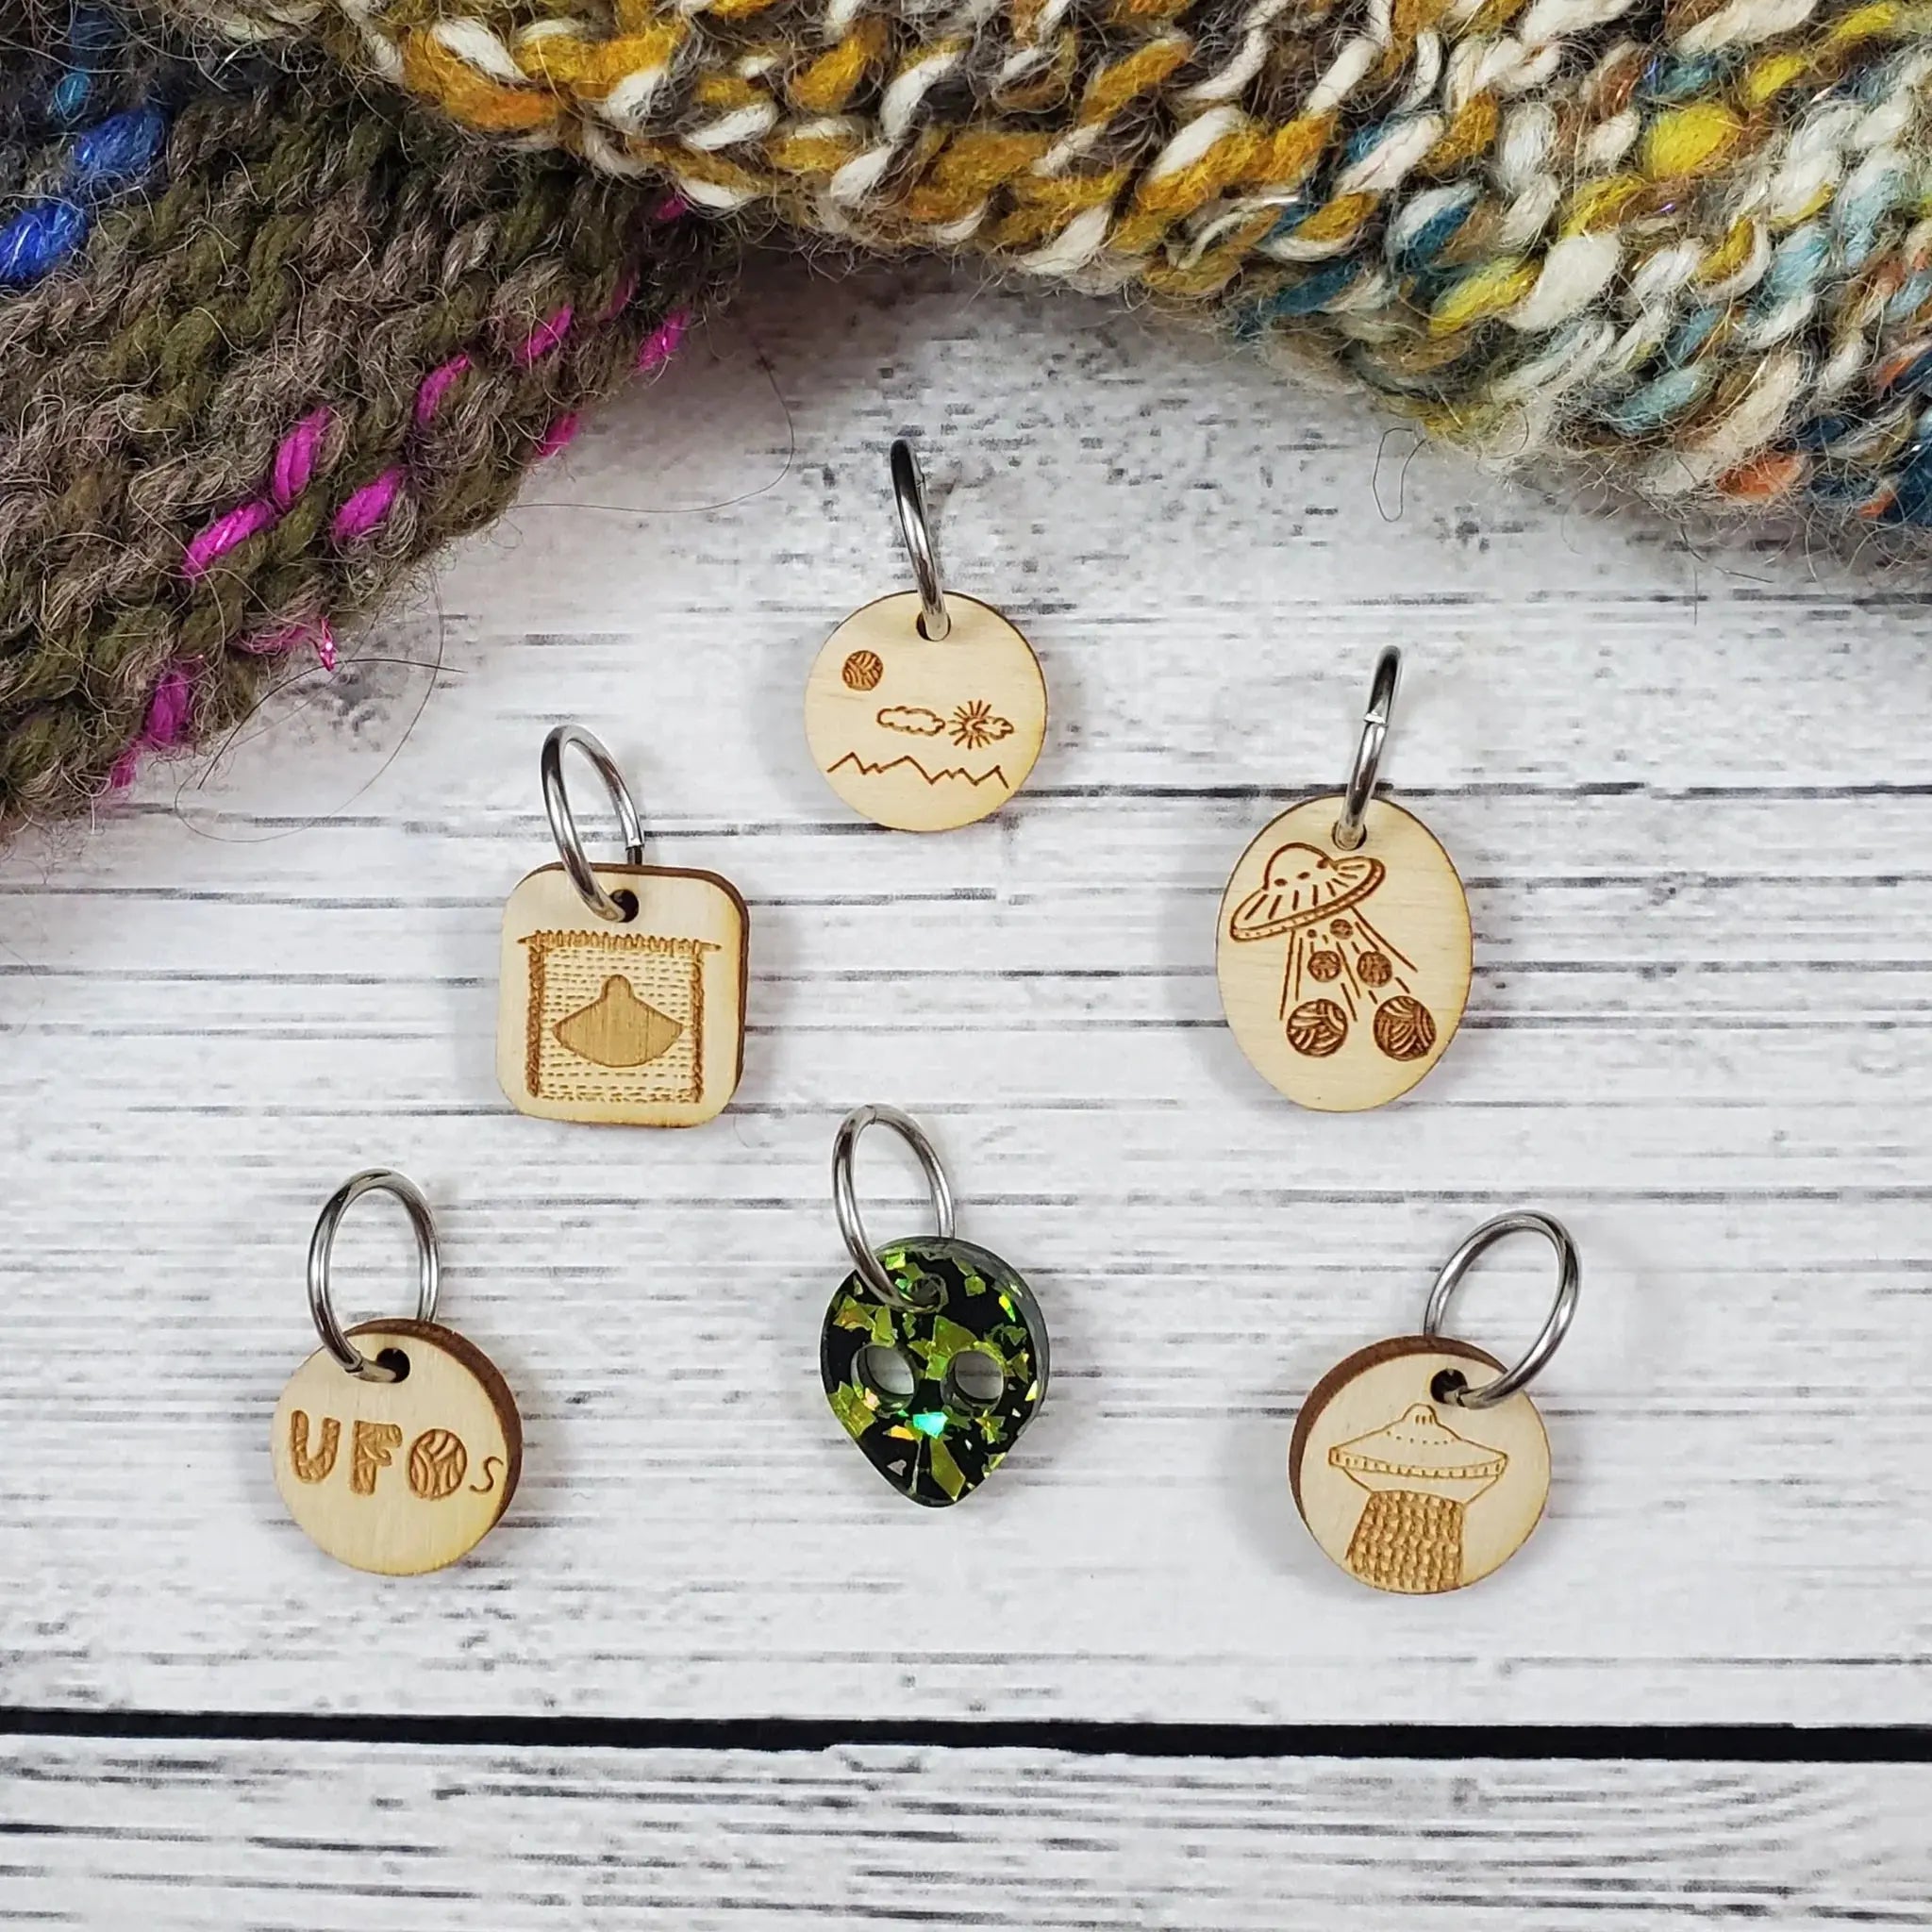 Handmade Knitting Stitch Markers 8 Count Charms